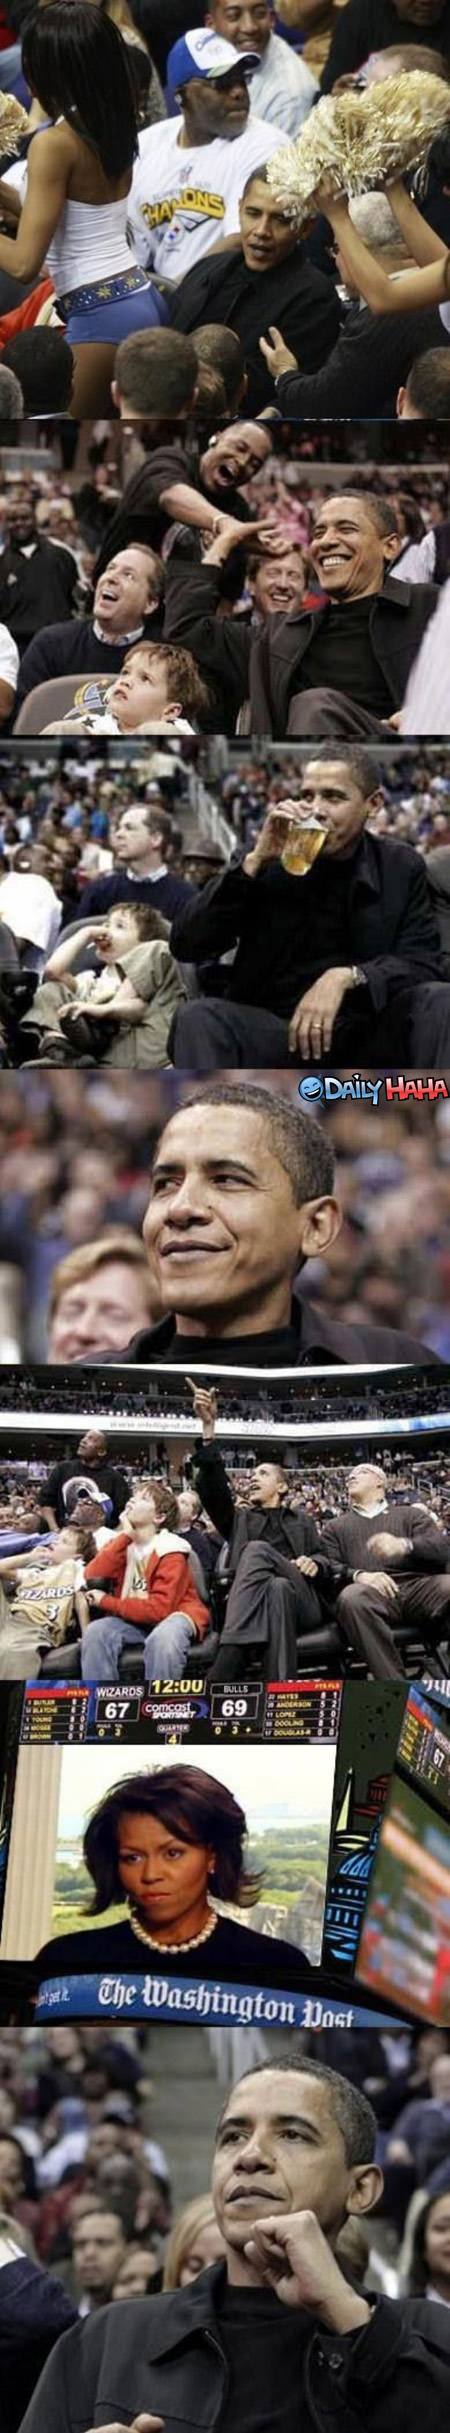 Obama Got Busted funny picture